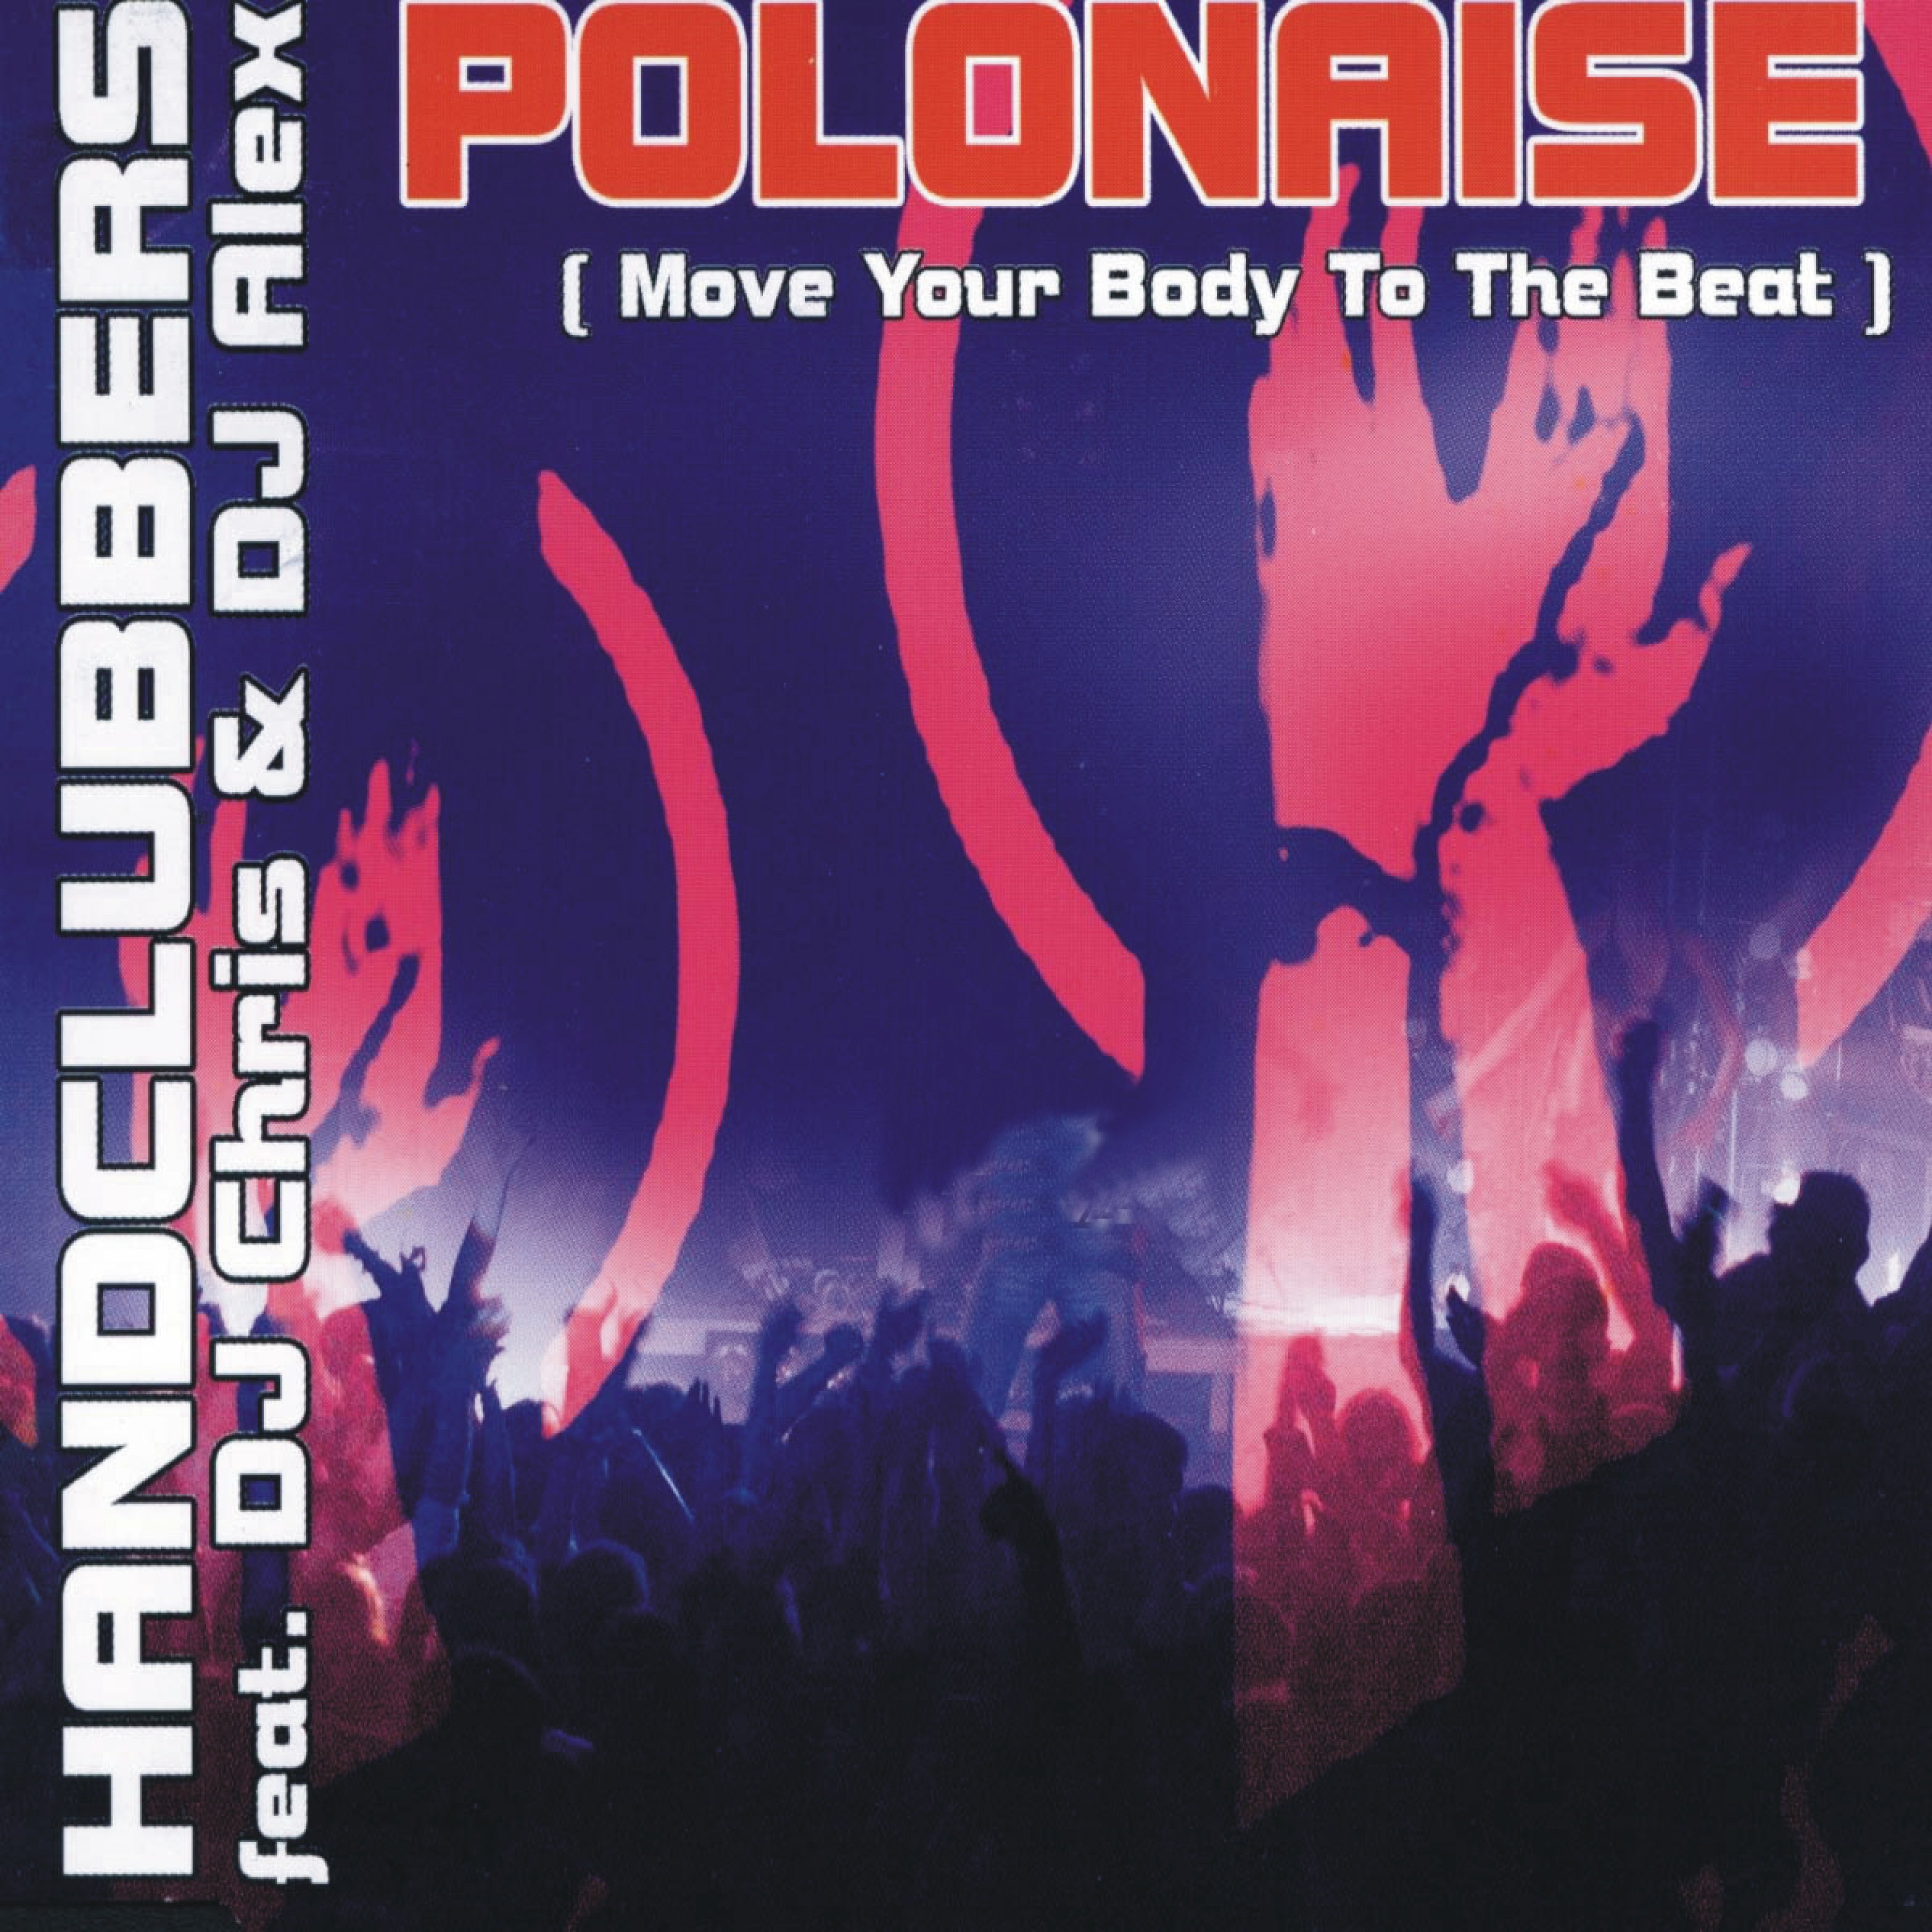 Polonaise (Move Your Body to the Beat)